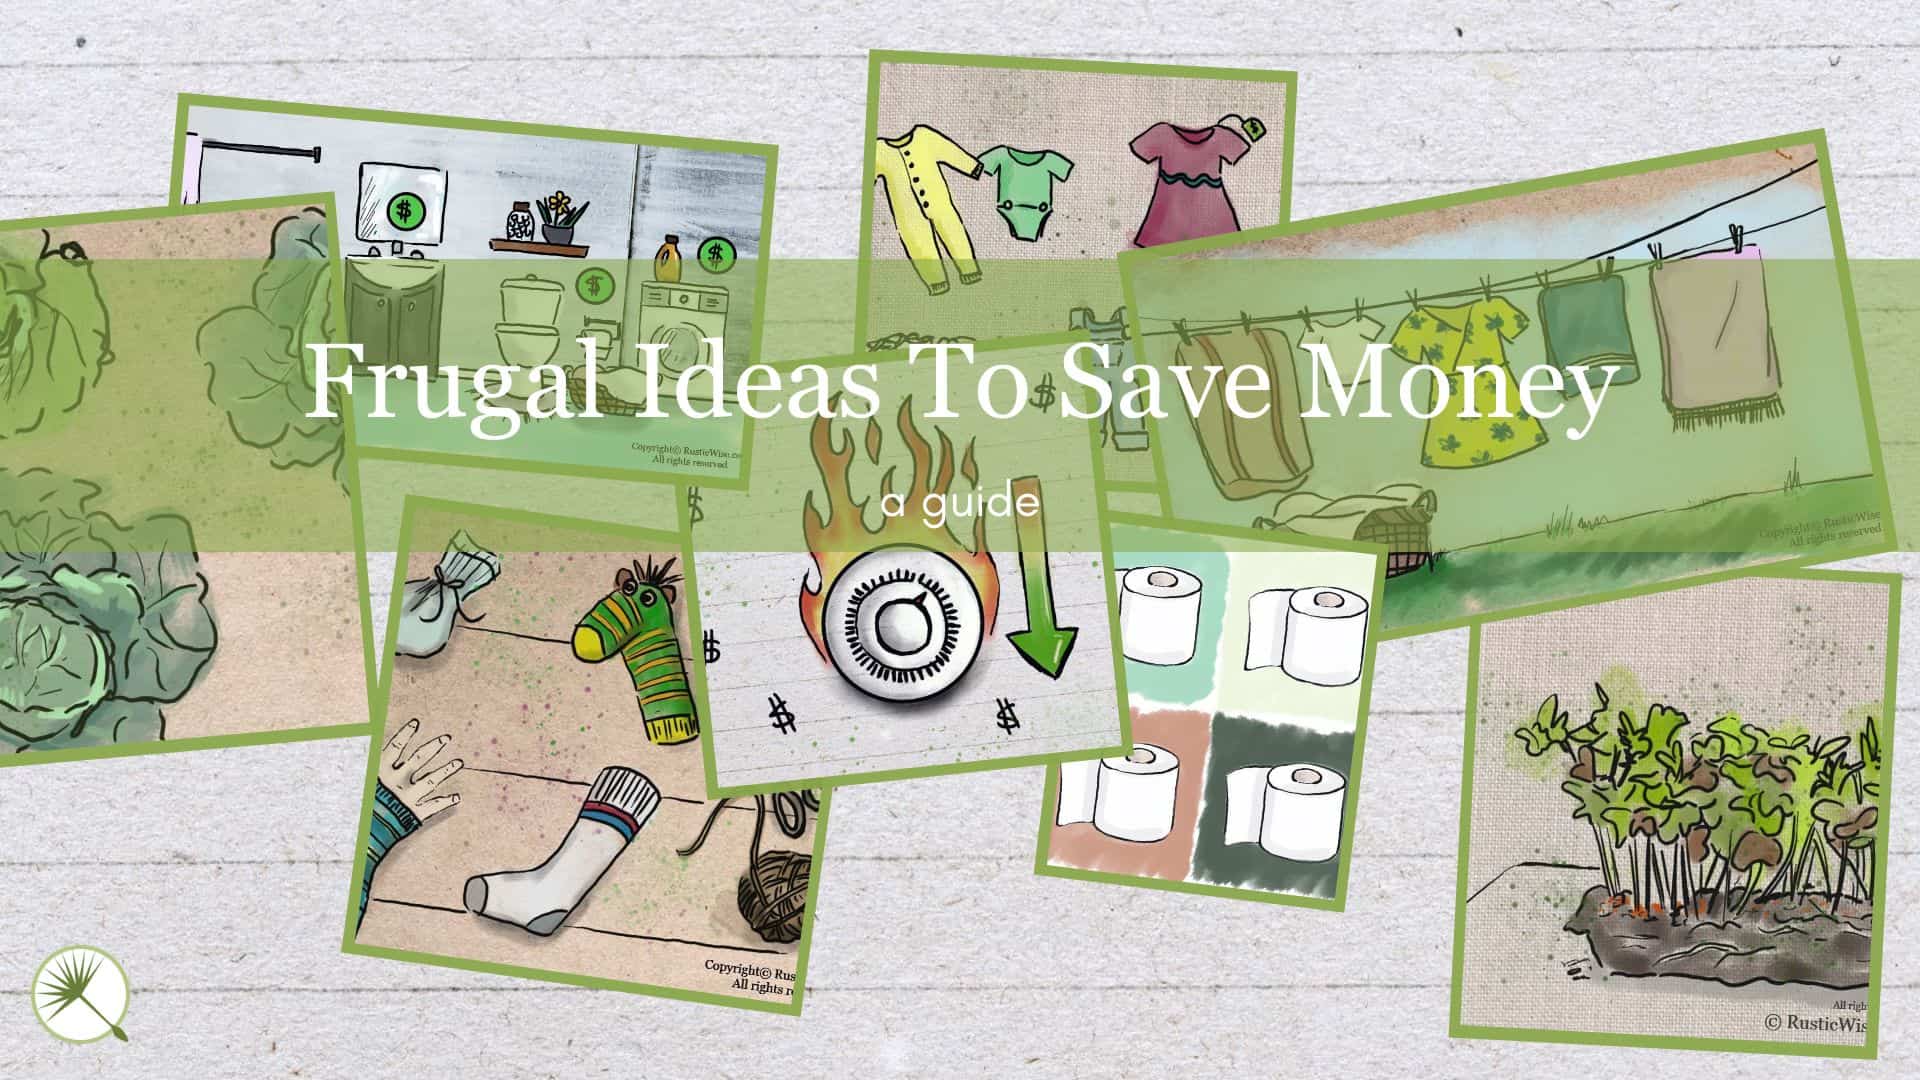 Frugal Ideas to Save Money